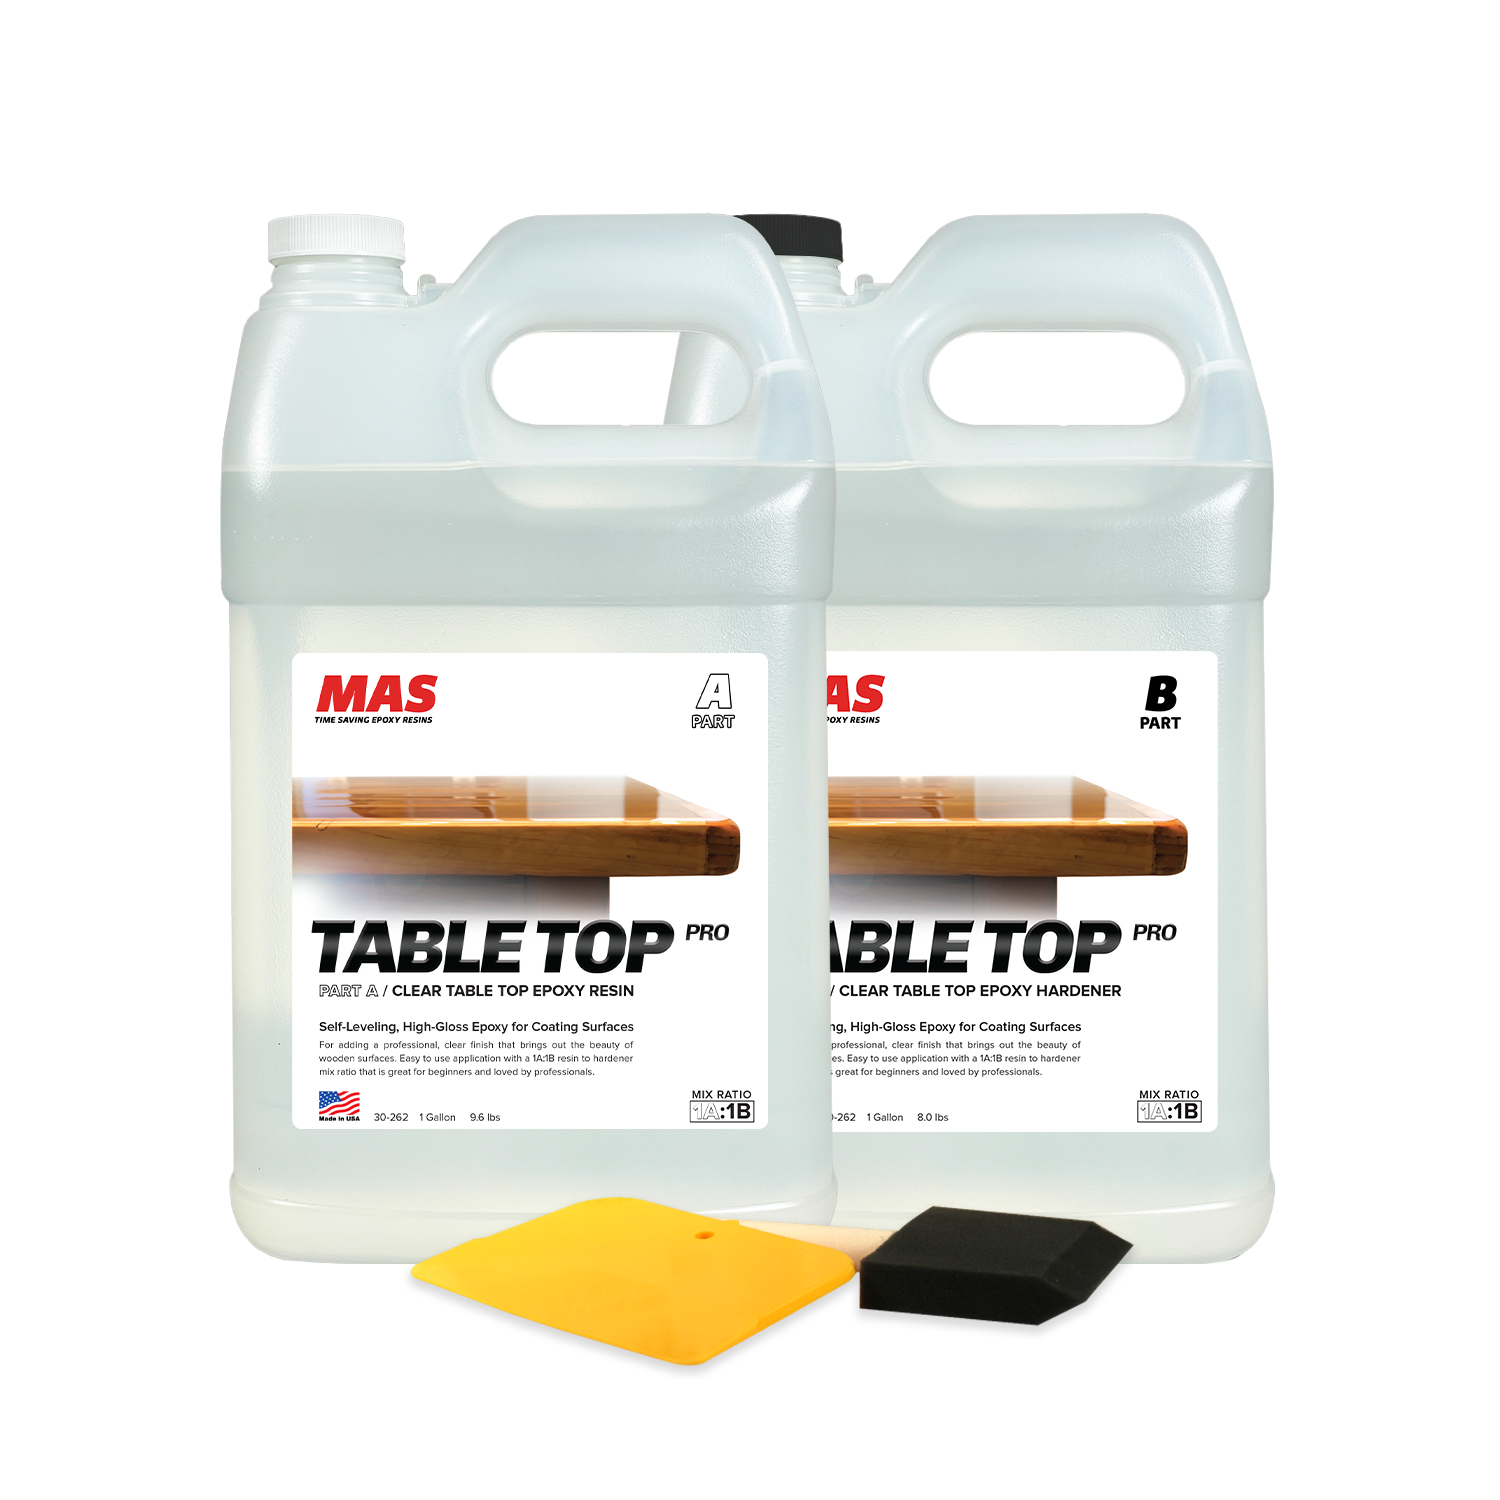 Can table top pro be poured over polyurethane that's been scuffed up?